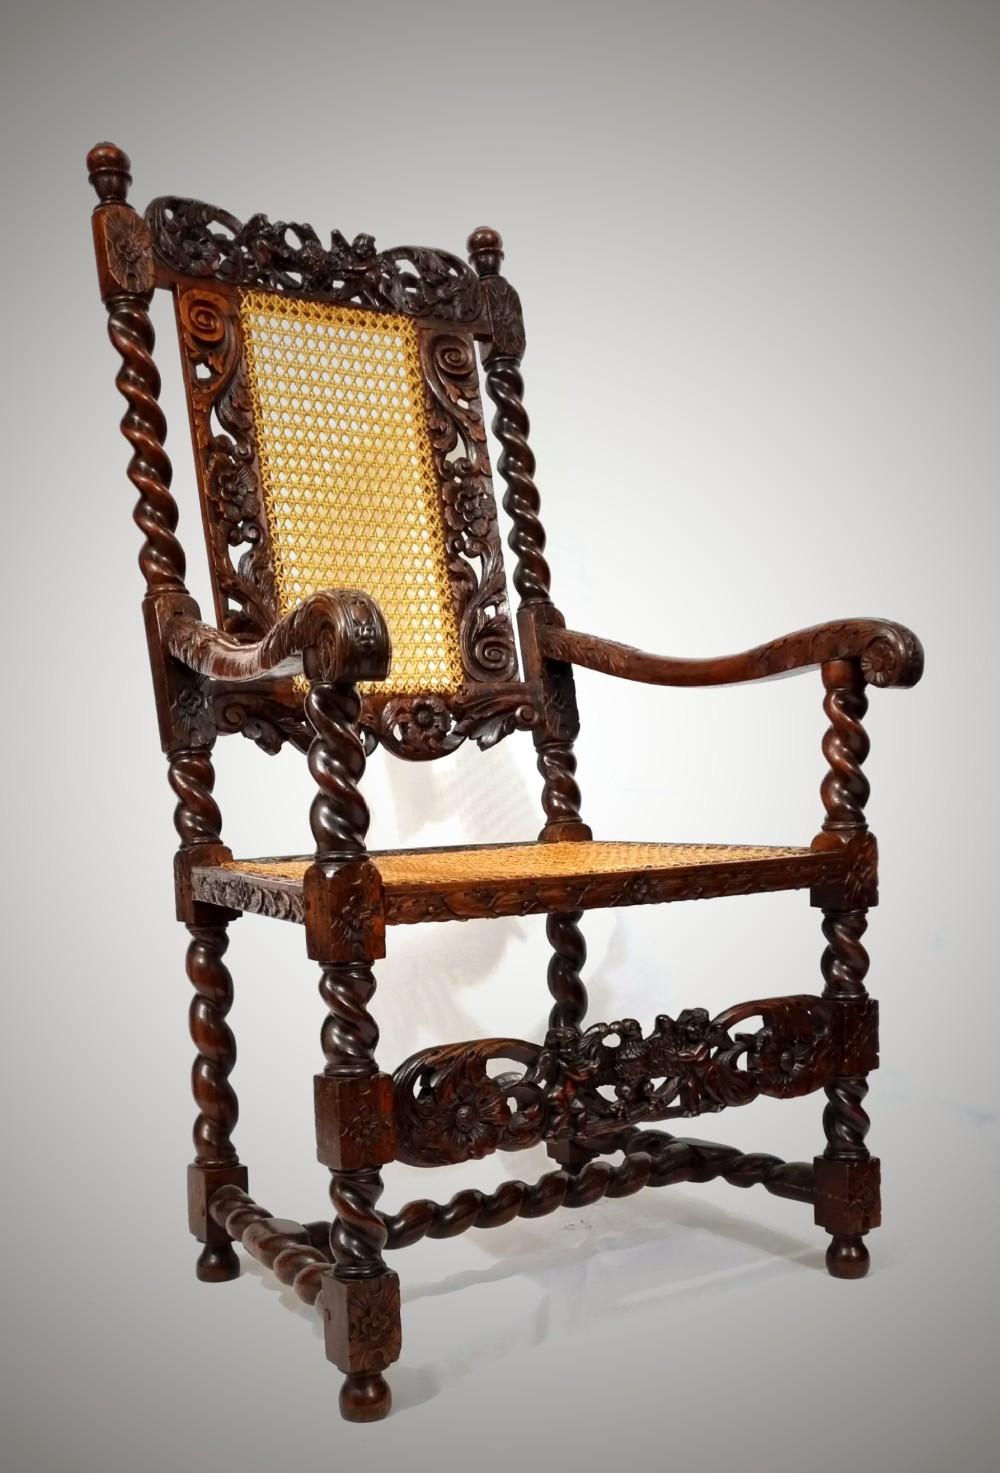 An Original English 17th century walnut armchair dating from the 1660s .Exquisitely carved with cherubs / eagles/ foliage .This chair is of exceptional quality and colour , the detail in the carving is breathtaking ! An amazing survivor being